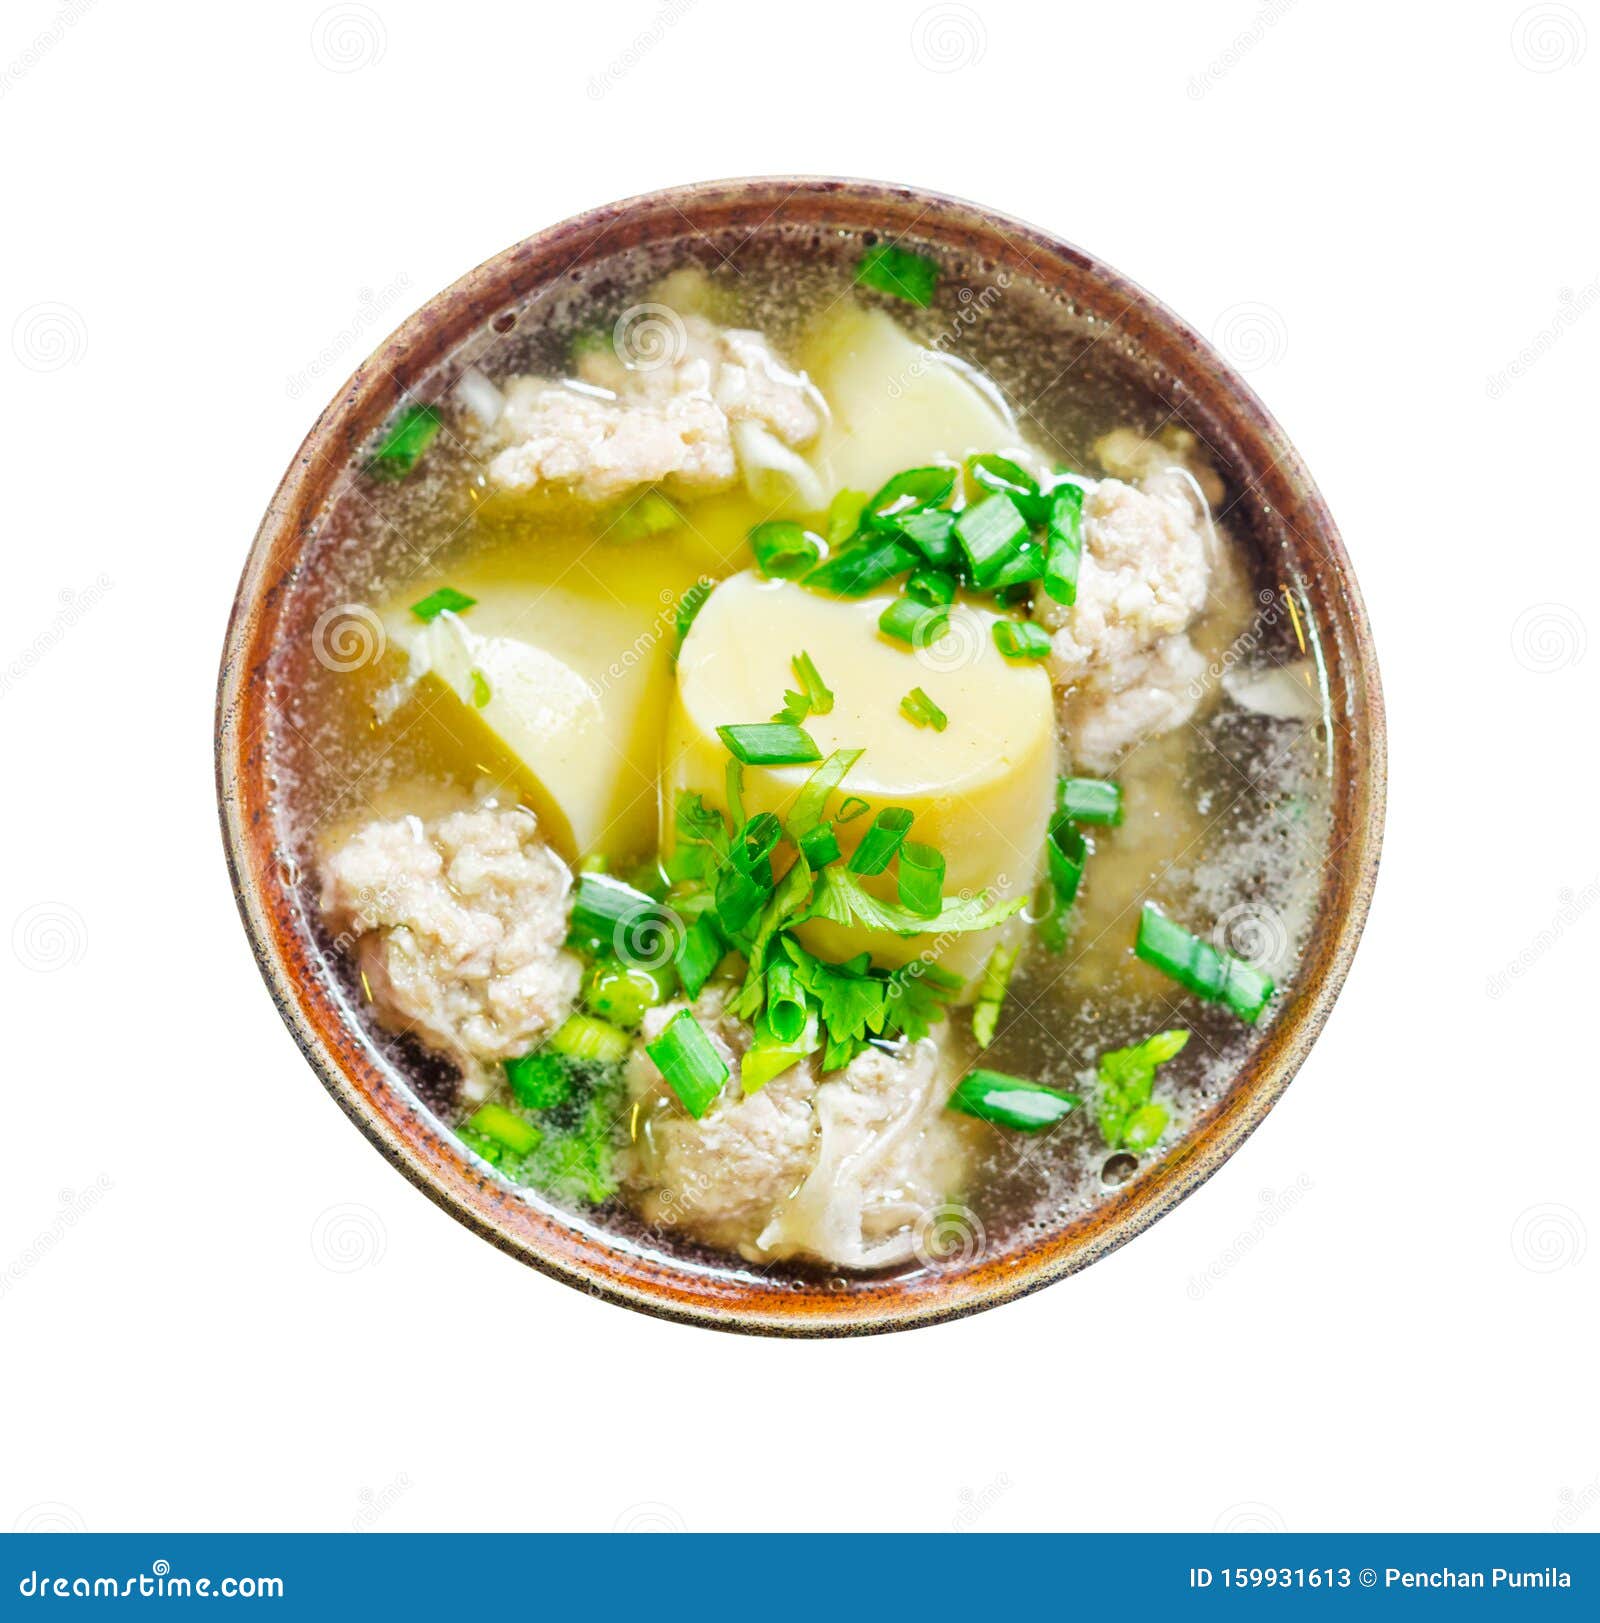 https://thumbs.dreamstime.com/z/minced-pork-soya-bean-curd-soup-minced-pork-soya-bean-curd-soup-wooden-bowl-isolated-white-background-save-clipping-159931613.jpg